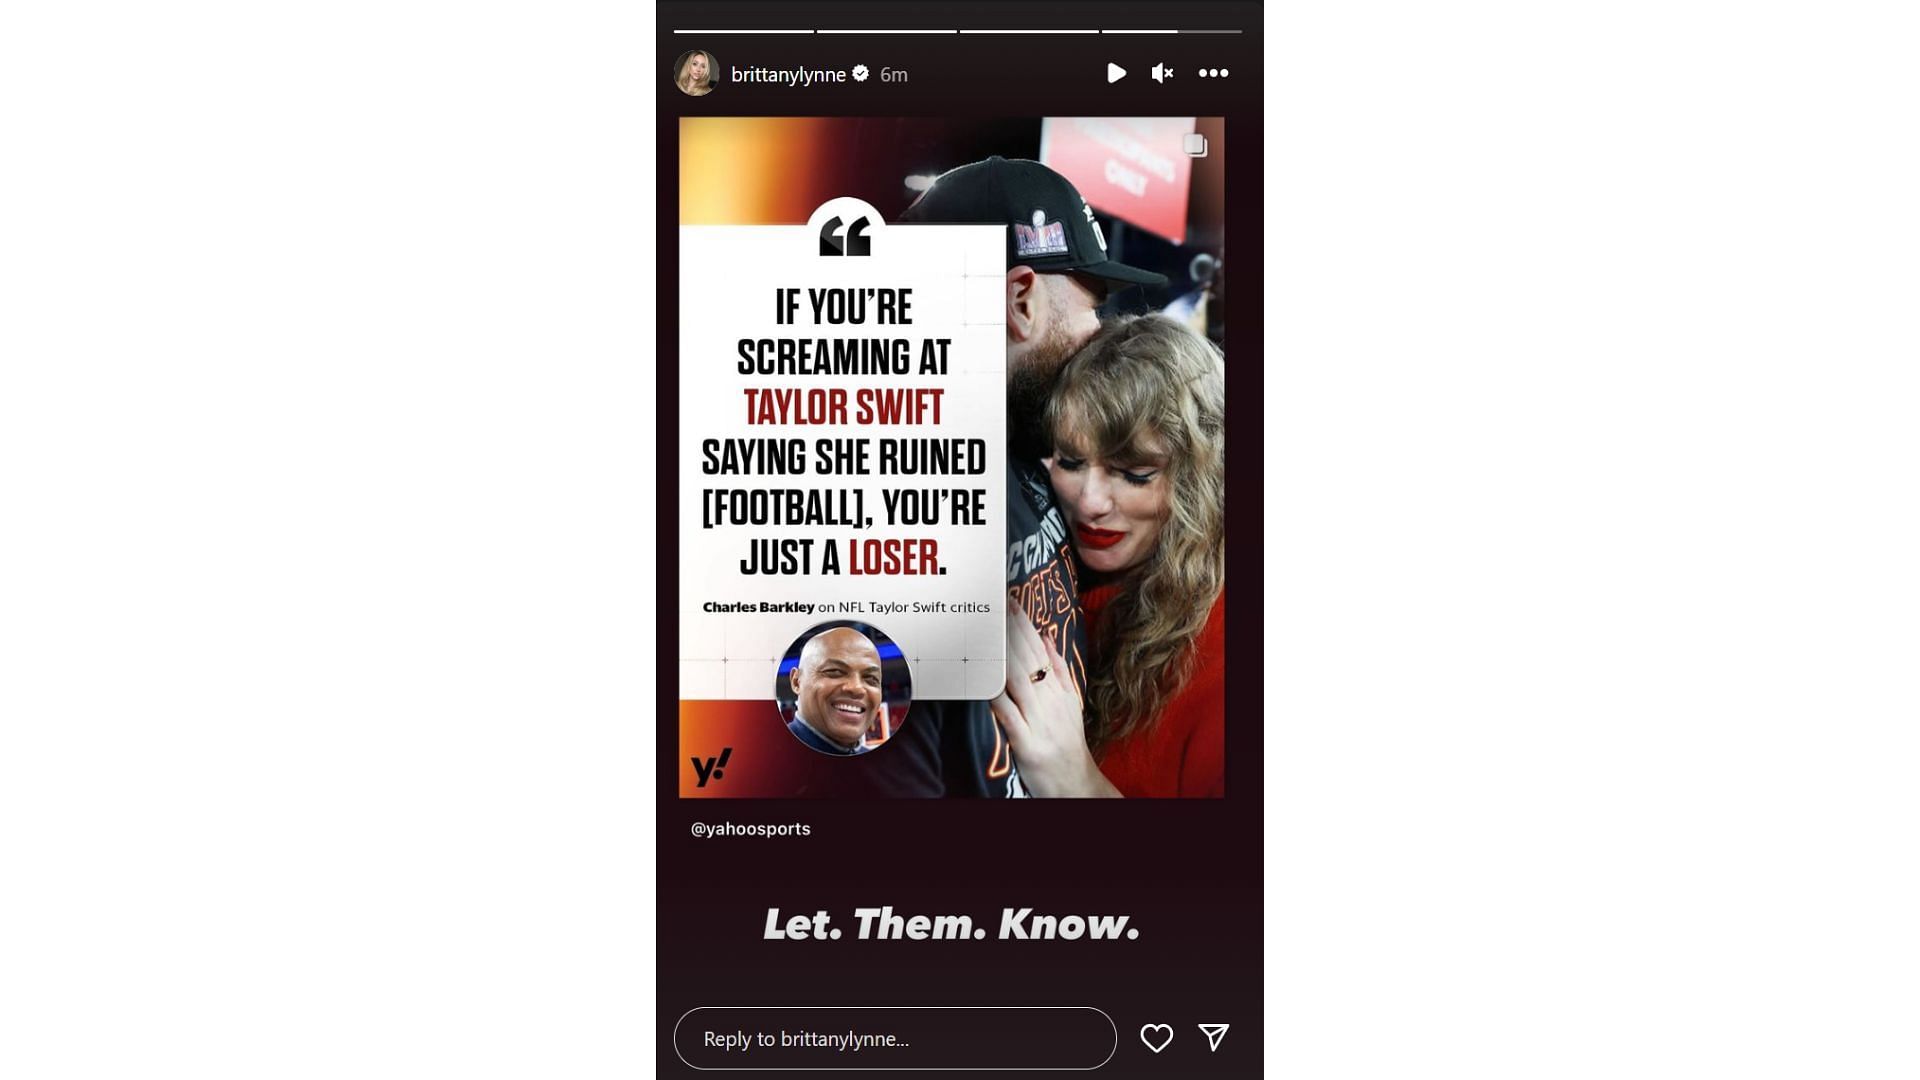 Brittany Mahomes defends Taylors Swift on Instagram (Image Credit: @brittanylynne IG)